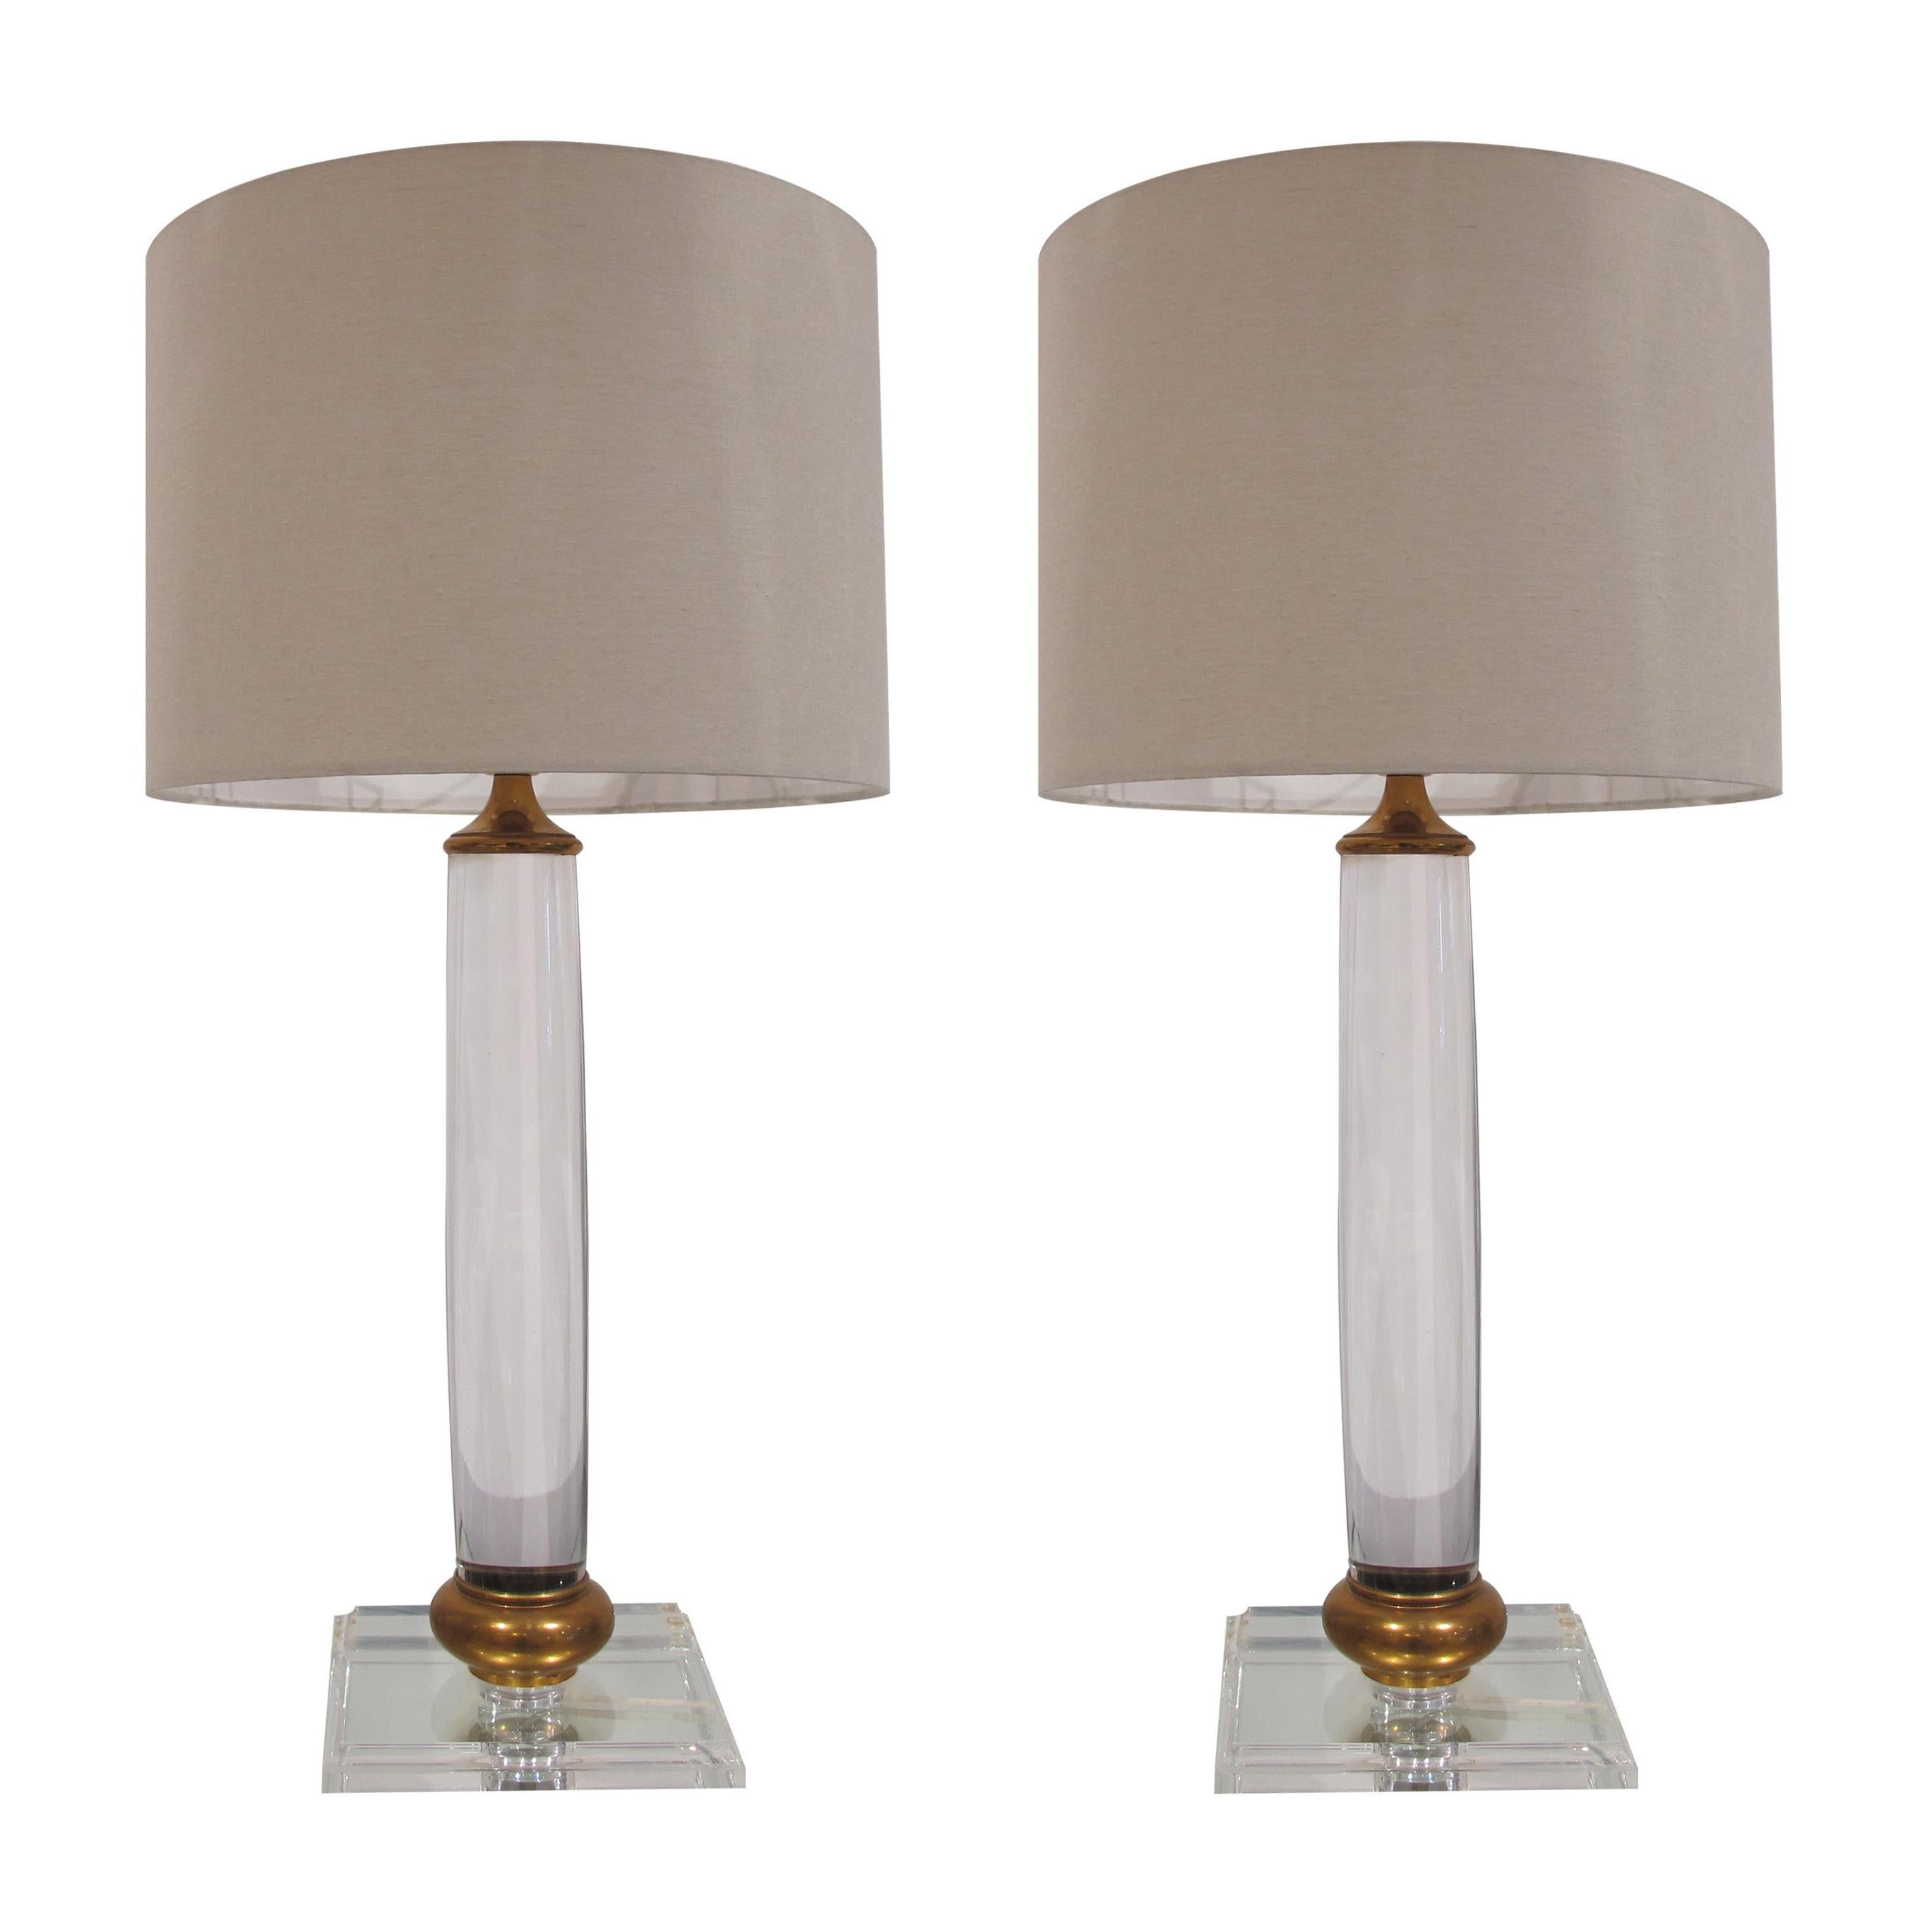 Pair of 1970s Cylindrical Italian Lucite And Brass Square Base Table Lamps